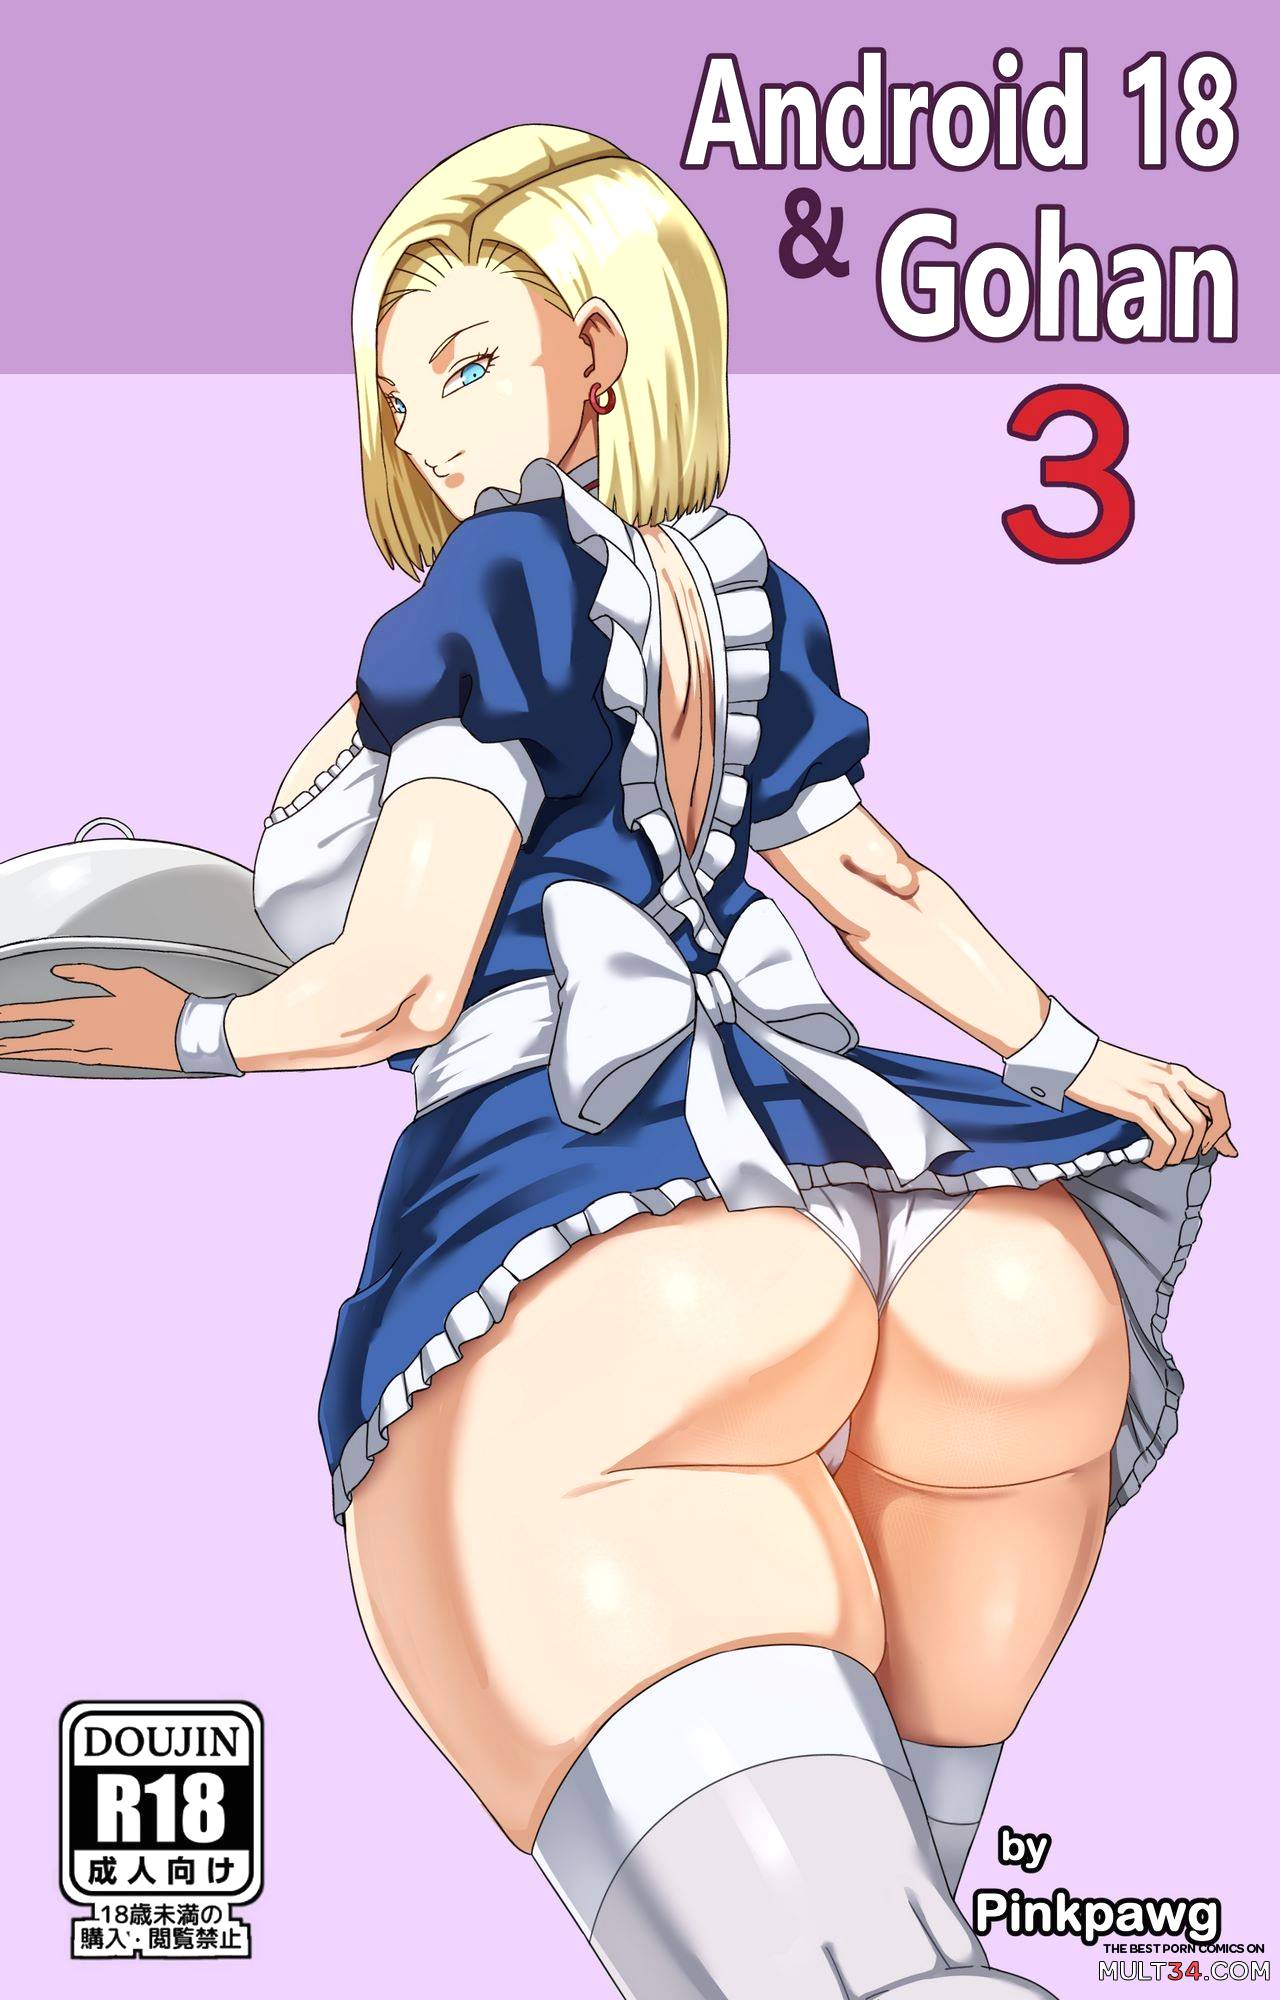 Android 18 naked comic